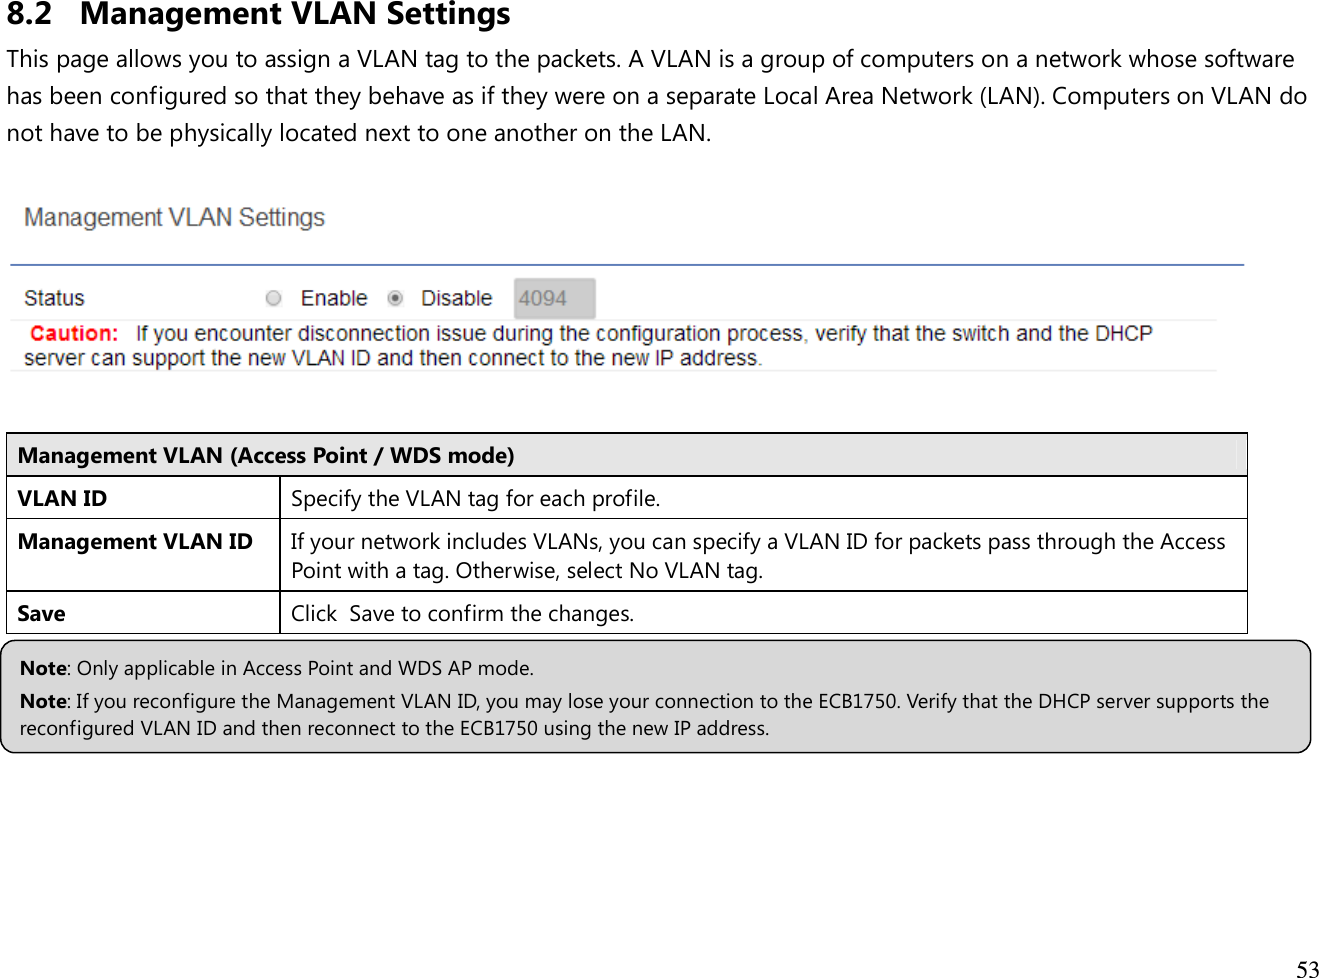  53  8.2 Management VLAN Settings This page allows you to assign a VLAN tag to the packets. A VLAN is a group of computers on a network whose software has been configured so that they behave as if they were on a separate Local Area Network (LAN). Computers on VLAN do not have to be physically located next to one another on the LAN.    Management VLAN (Access Point / WDS mode) VLAN ID Specify the VLAN tag for each profile. Management VLAN ID If your network includes VLANs, you can specify a VLAN ID for packets pass through the Access Point with a tag. Otherwise, select No VLAN tag. Save Click  Save to confirm the changes.       Note: Only applicable in Access Point and WDS AP mode. Note: If you reconfigure the Management VLAN ID, you may lose your connection to the ECB1750. Verify that the DHCP server supports the reconfigured VLAN ID and then reconnect to the ECB1750 using the new IP address.  